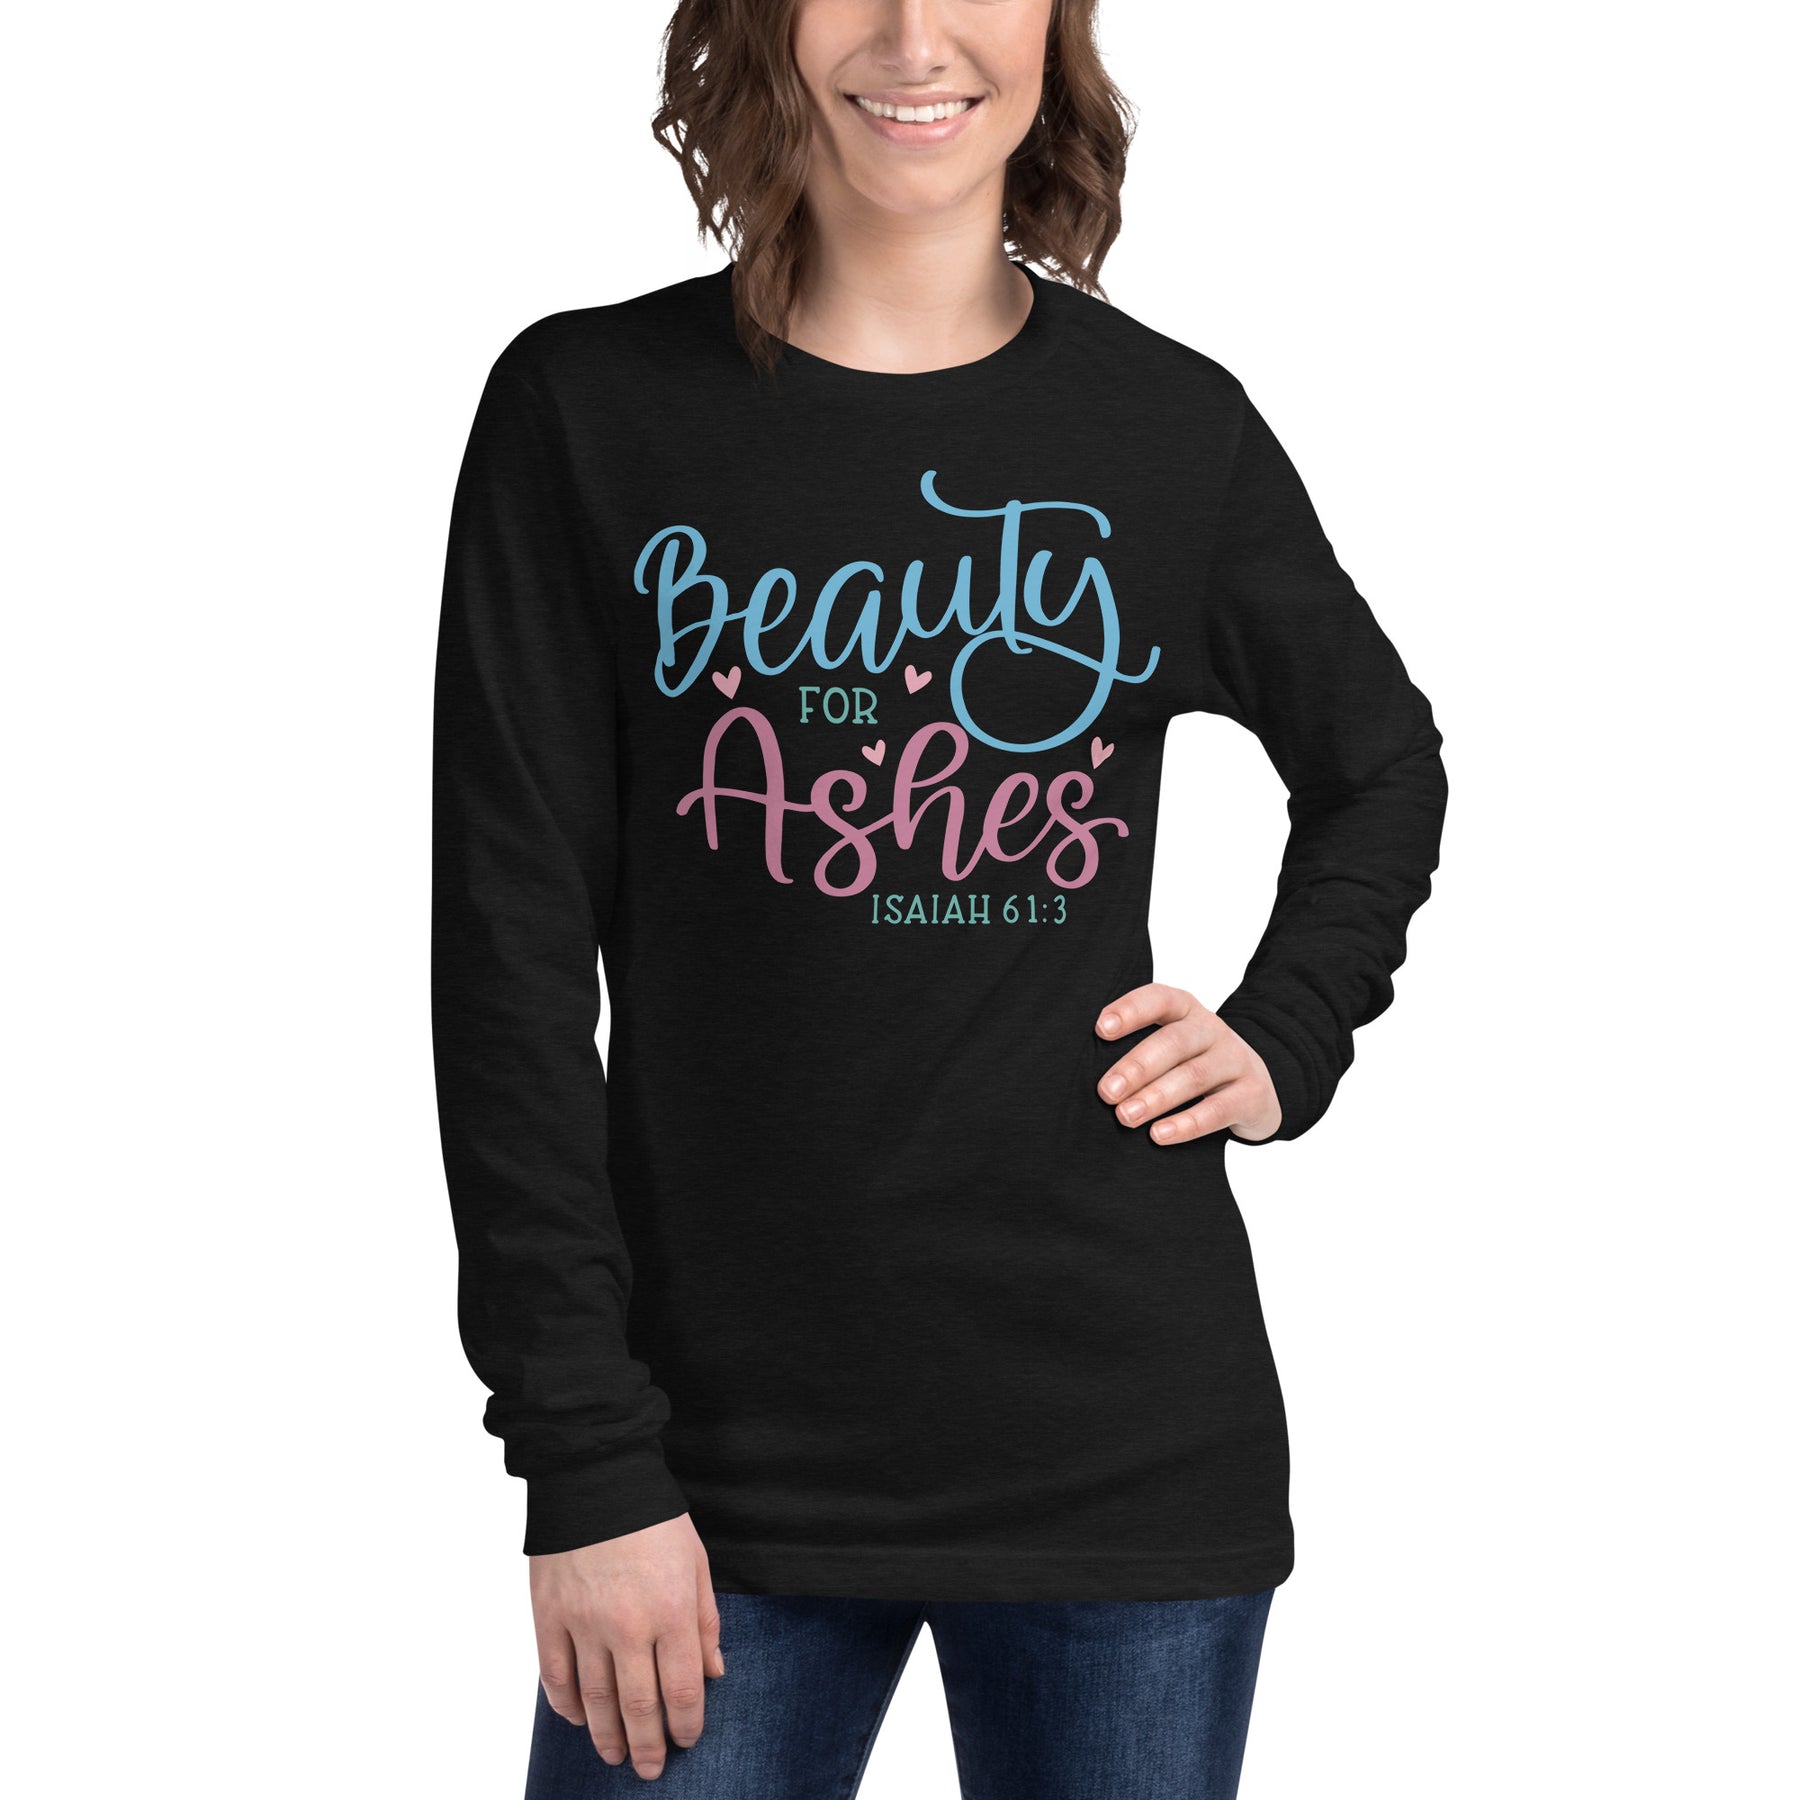 Beauty For Ashes - Isaiah 61:3 - Women's Long Sleeve T-Shirt